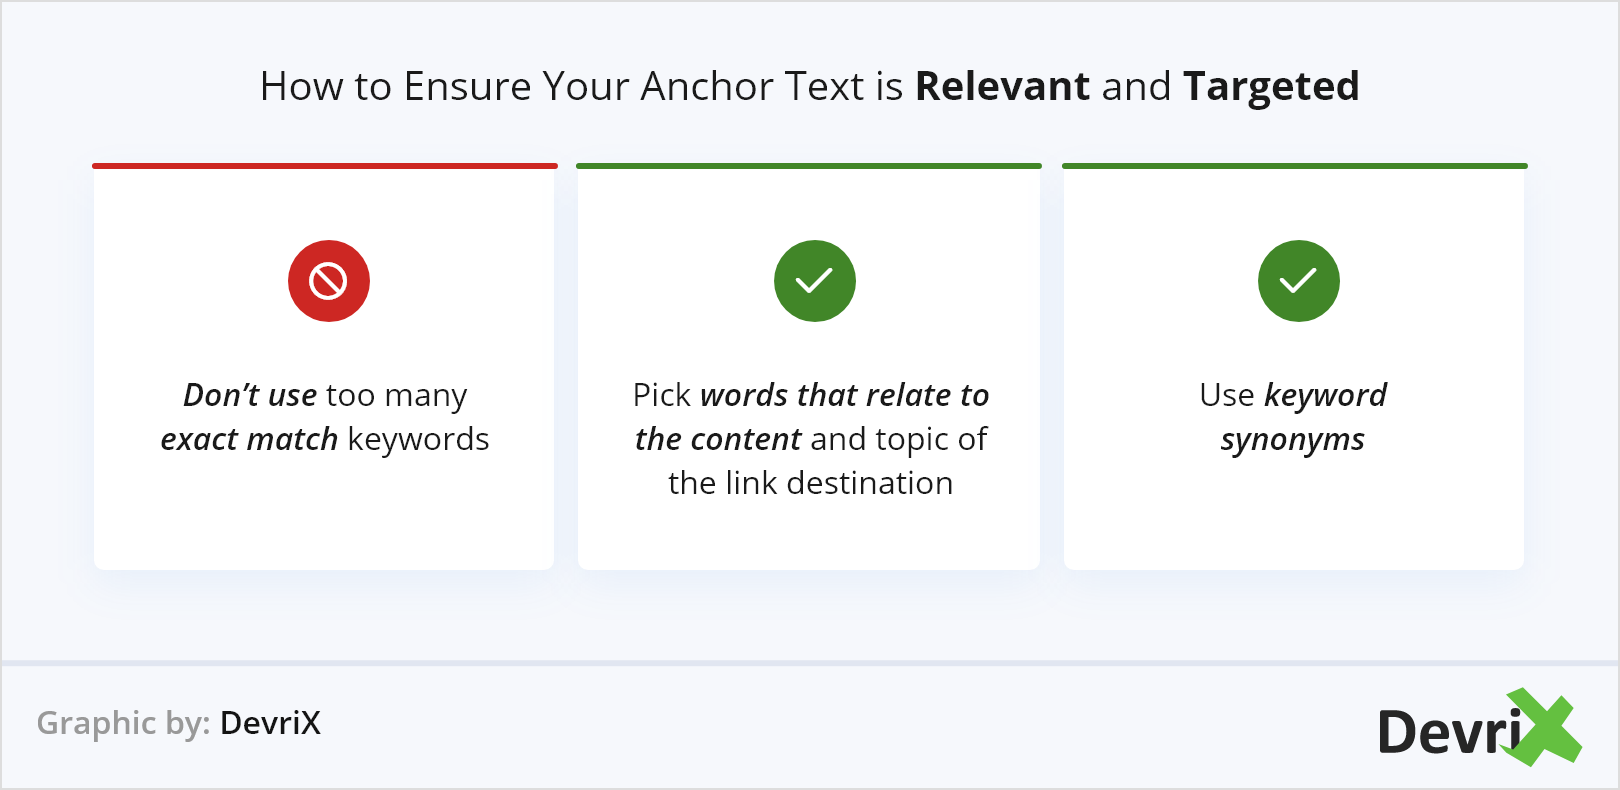 How to Ensure Your Anchor Text is Relevant and Targeted